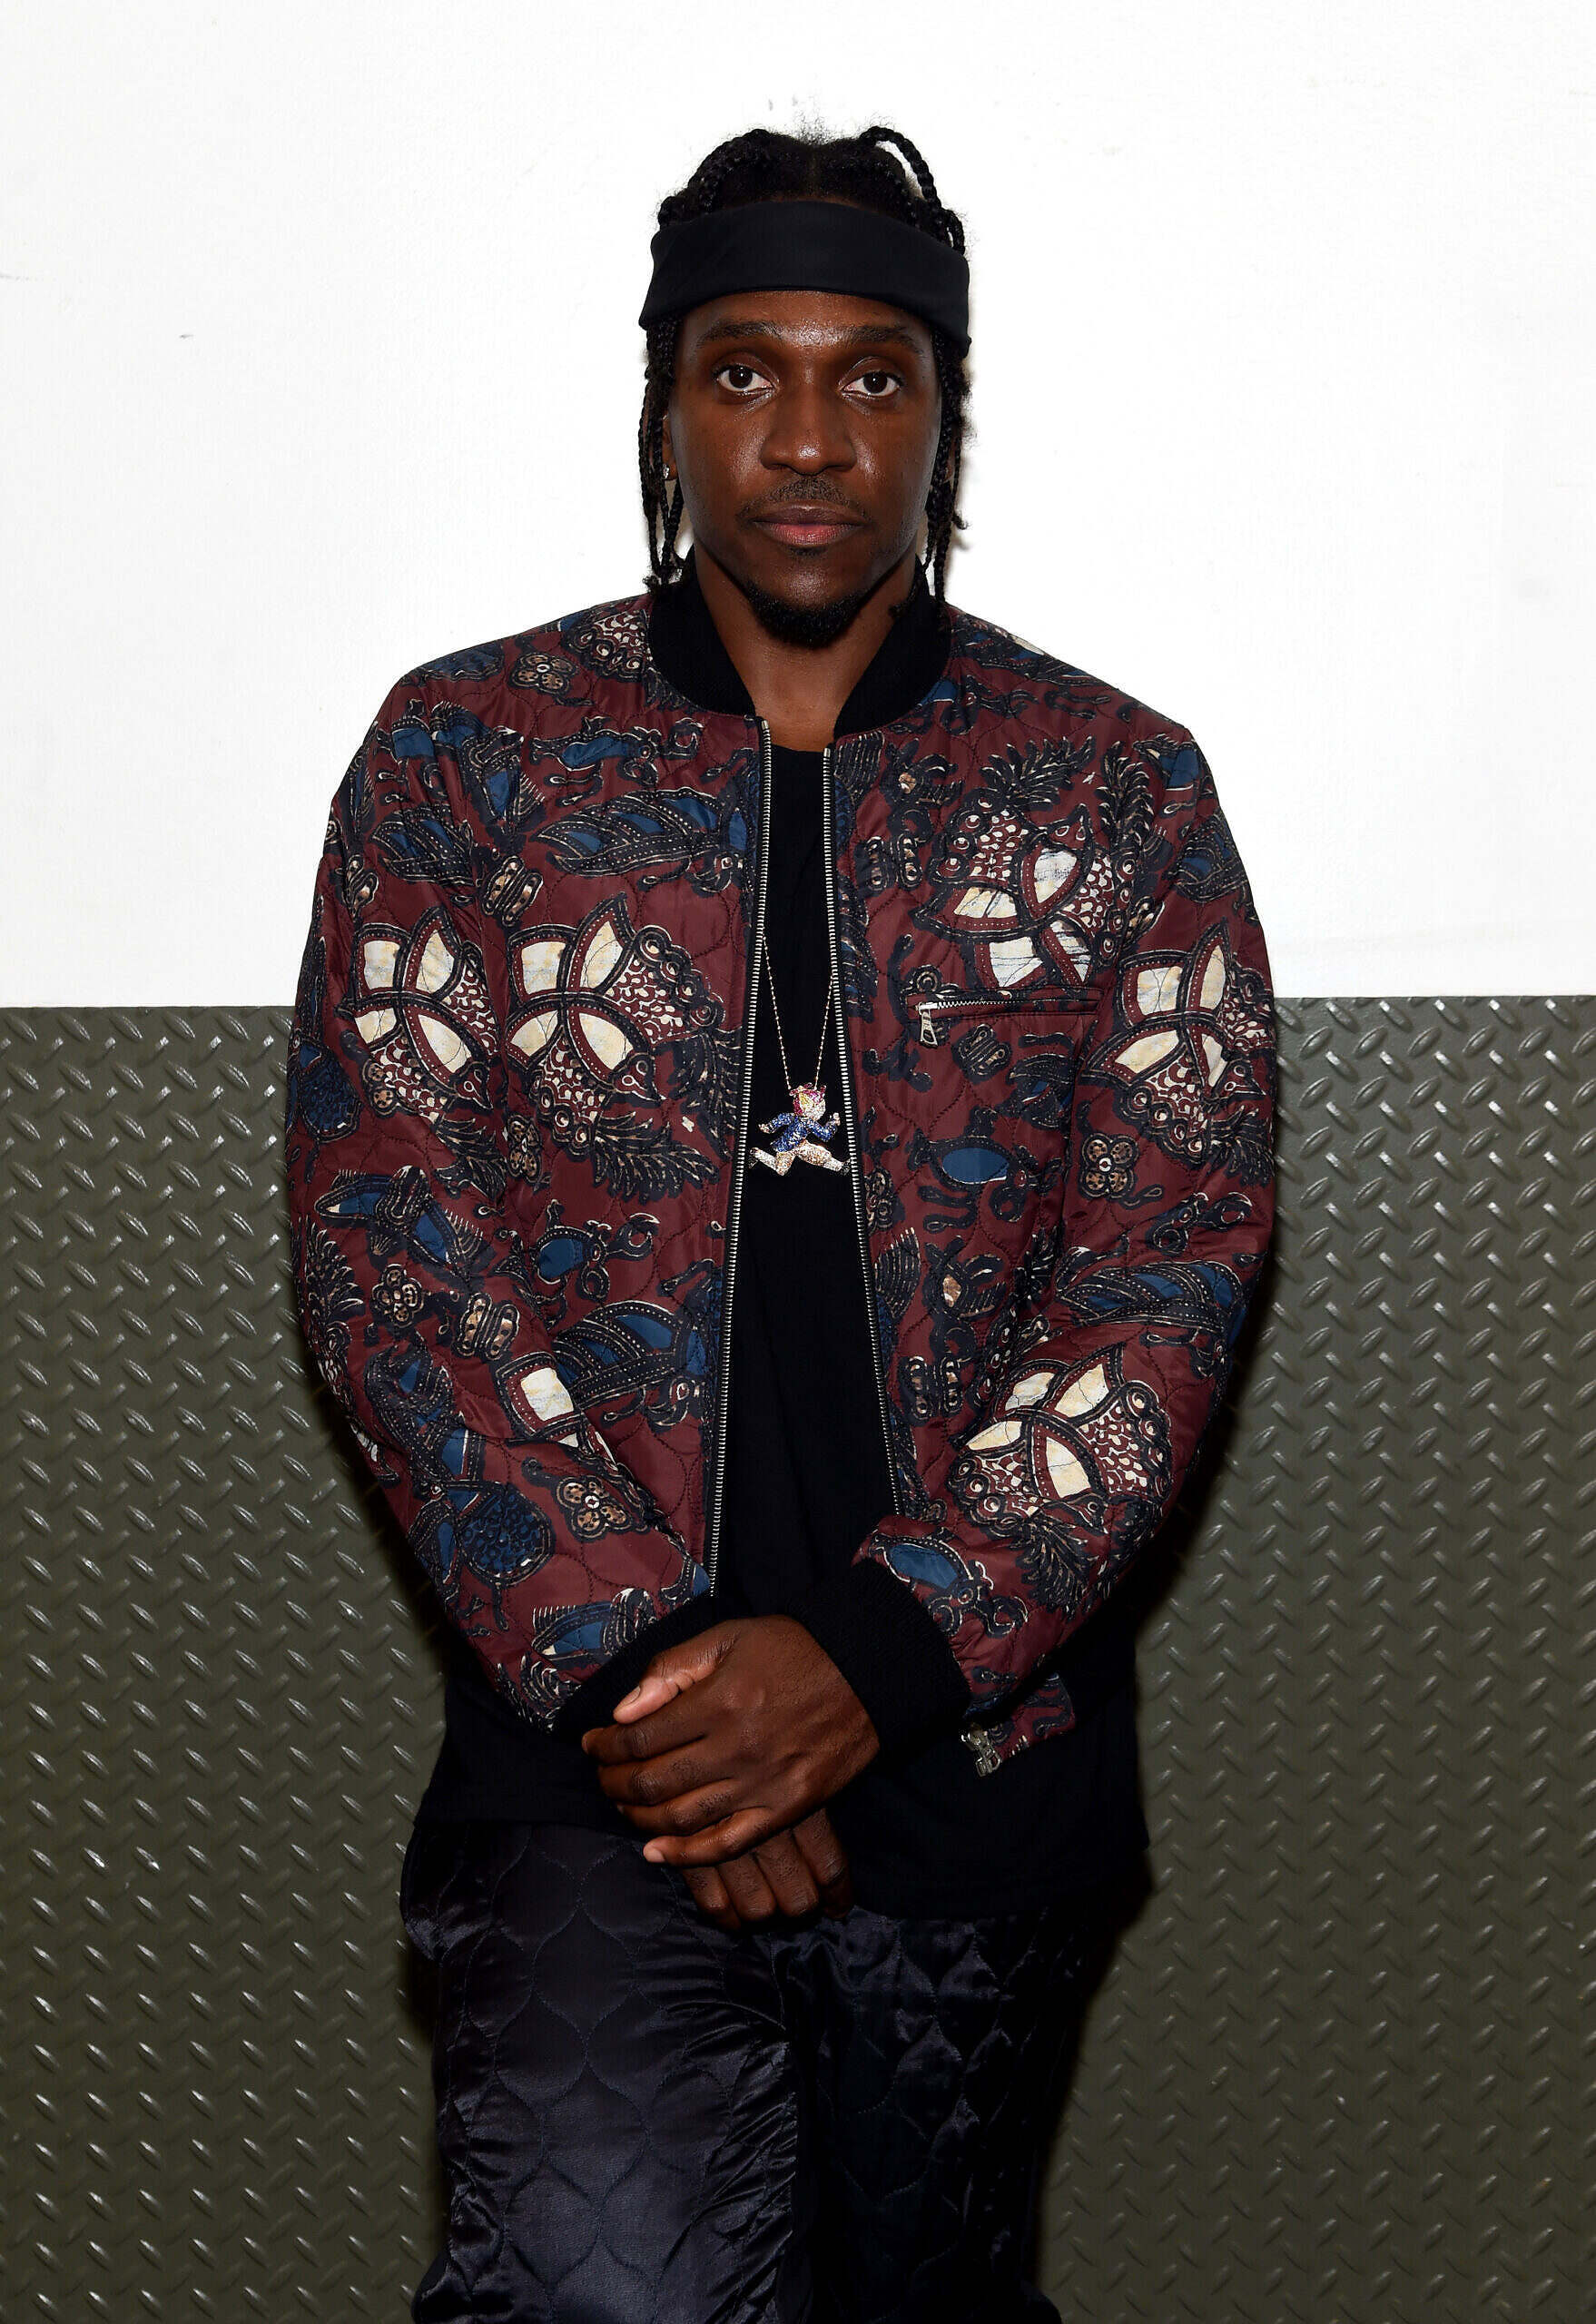 Rapper Pusha T Teams Up With Grailed For Additional Closet Sale Including Chanel, Gucci, Marni, Balenciaga, & More